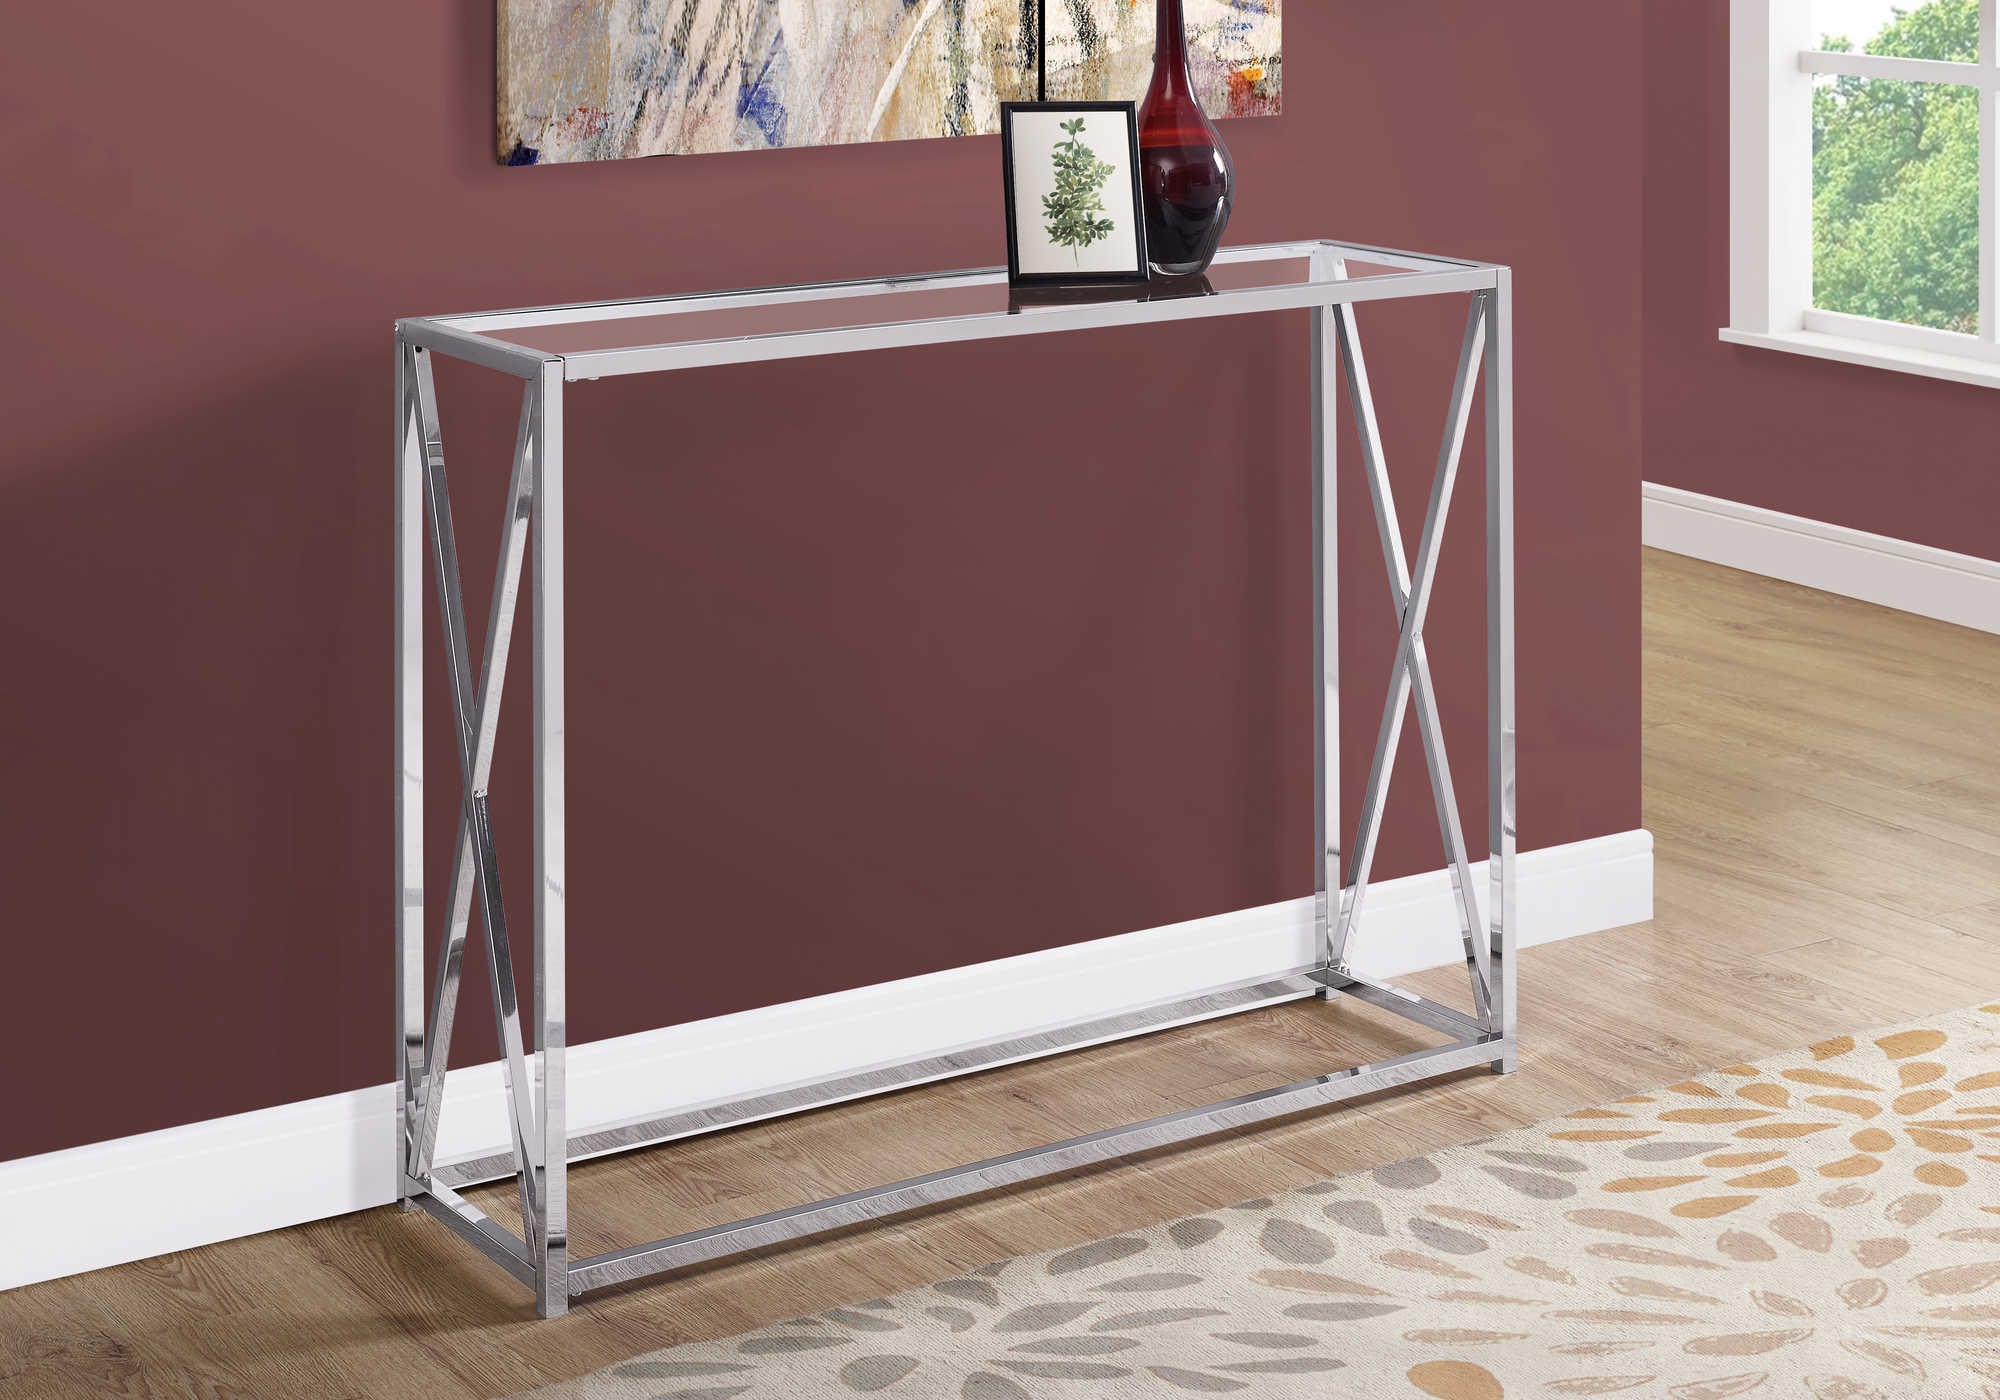 I 3442 - ACCENT TABLE - 42"L / CHROME METAL WITH TEMPERED GLASS BY MONARCH SPECIALTIES INC